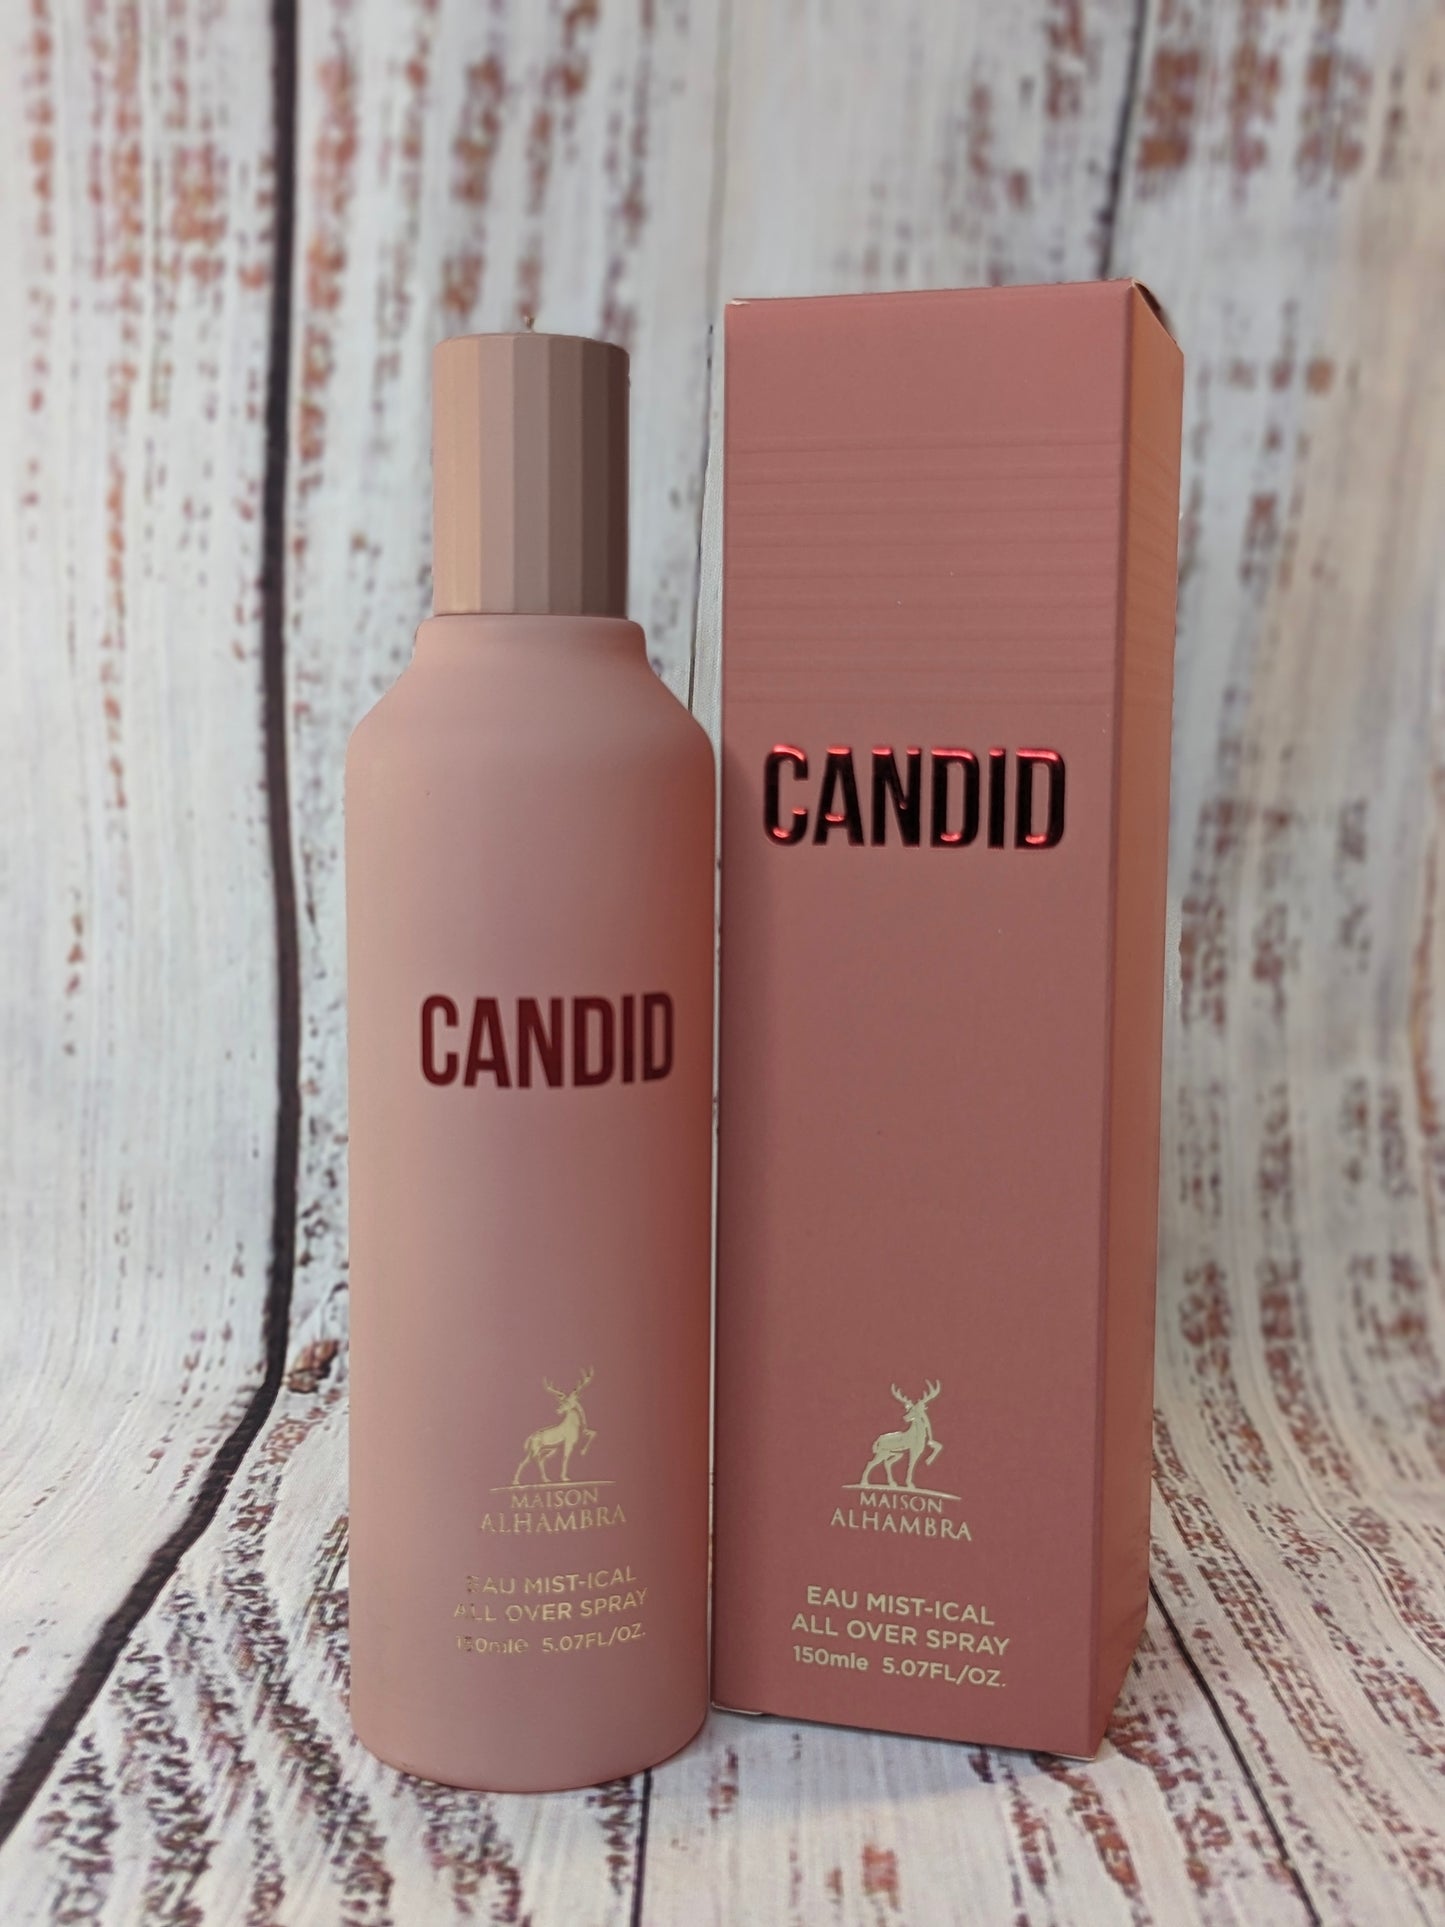 Candid by Maison Alhambra All Over Spray 150ml